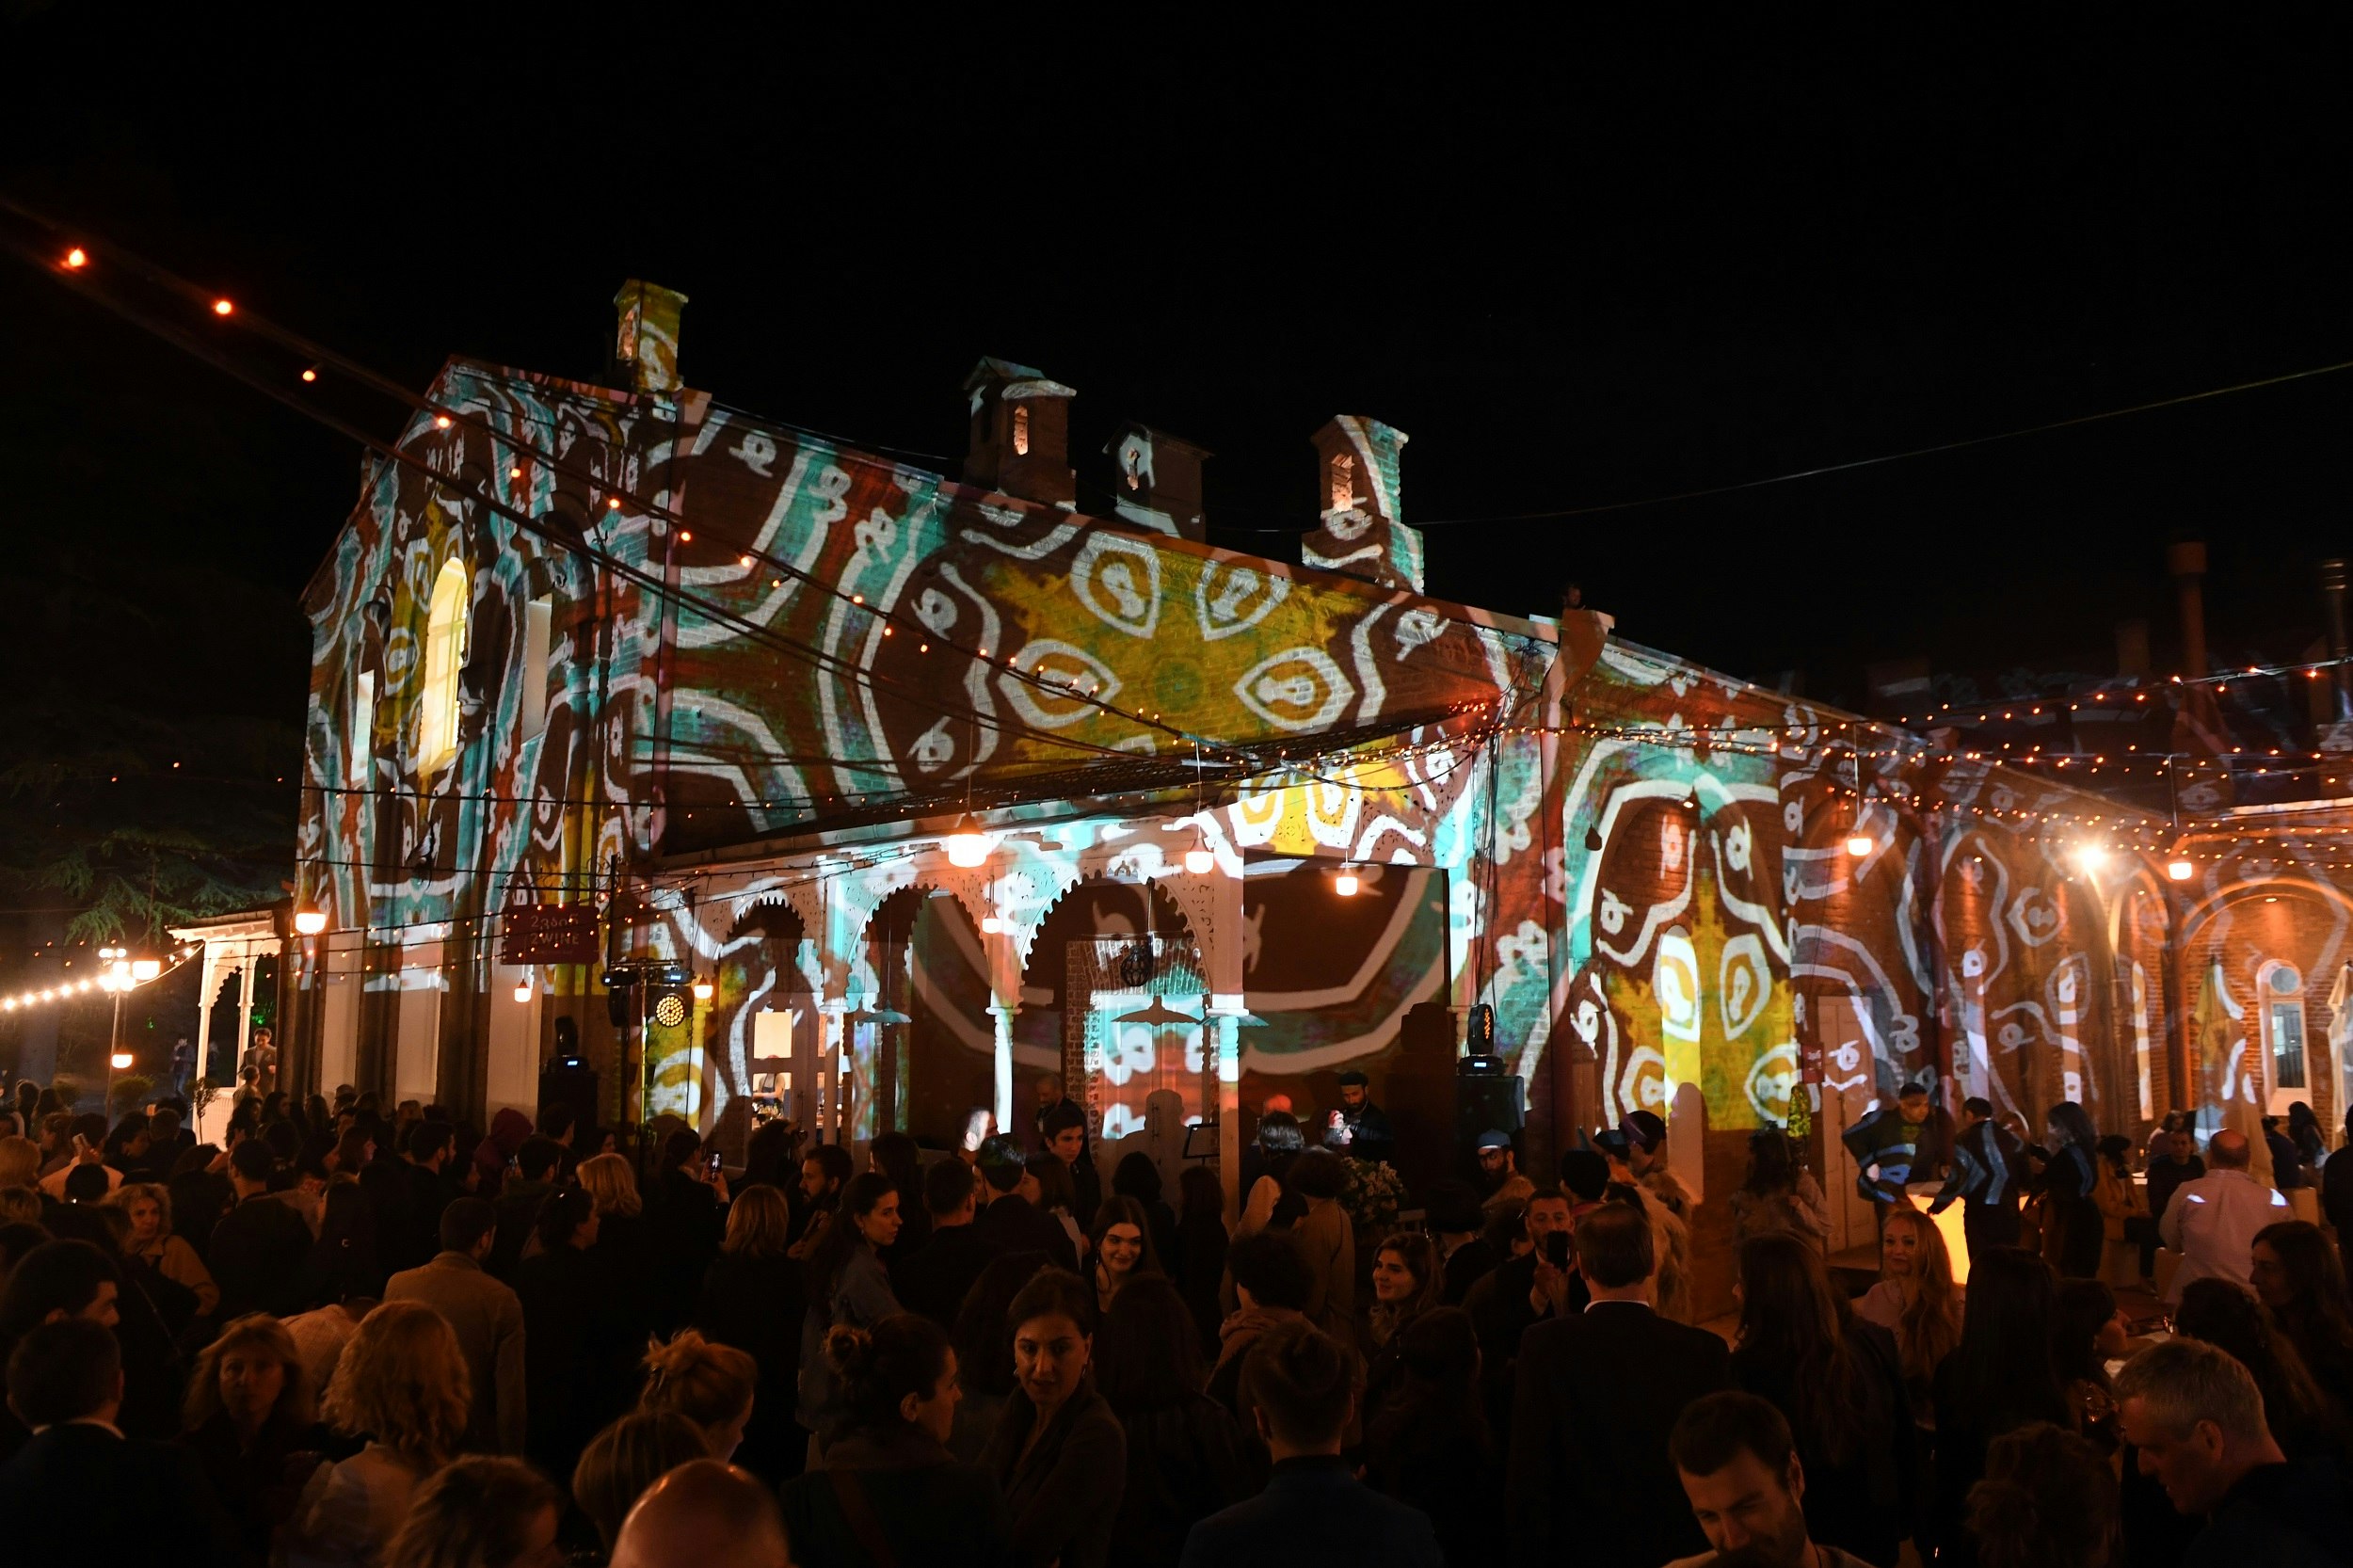 Patterns are projected by lights onto a building. The area is crowded with people socialising